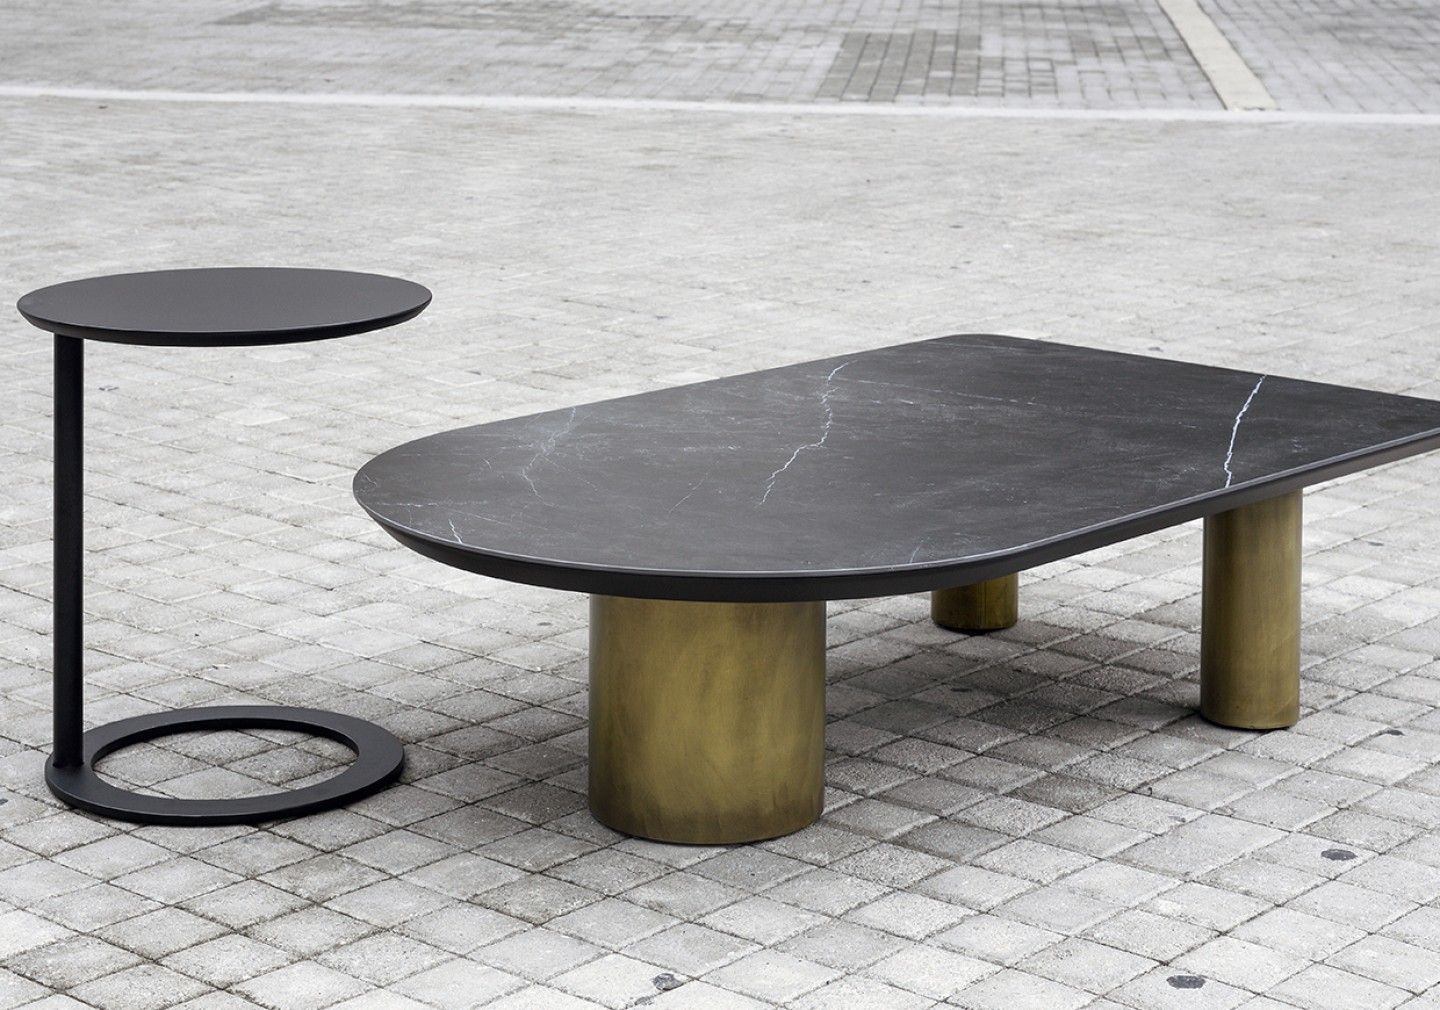 THE NORA COFFEE TABLE